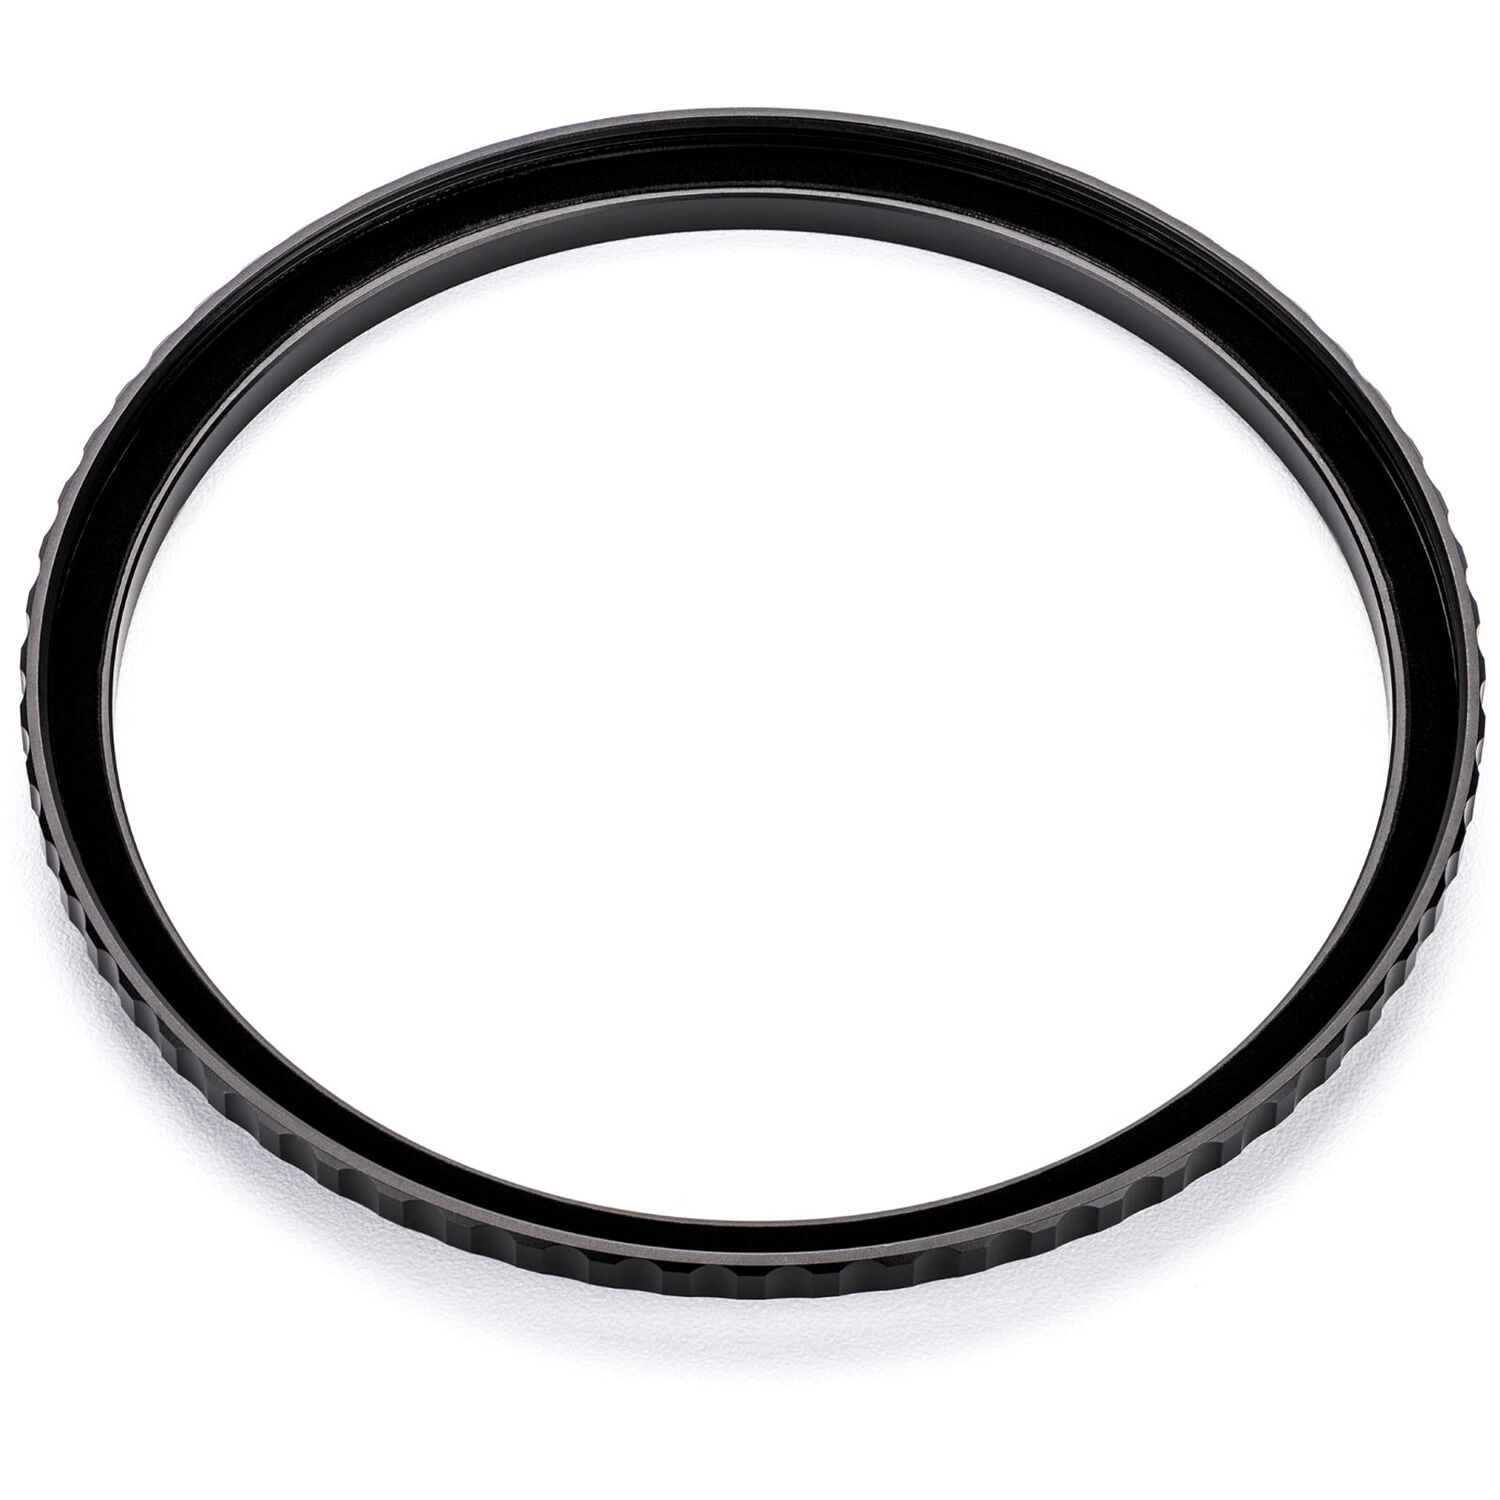 NiSi Brass Pro 40.5-49mm Step-Up Ring